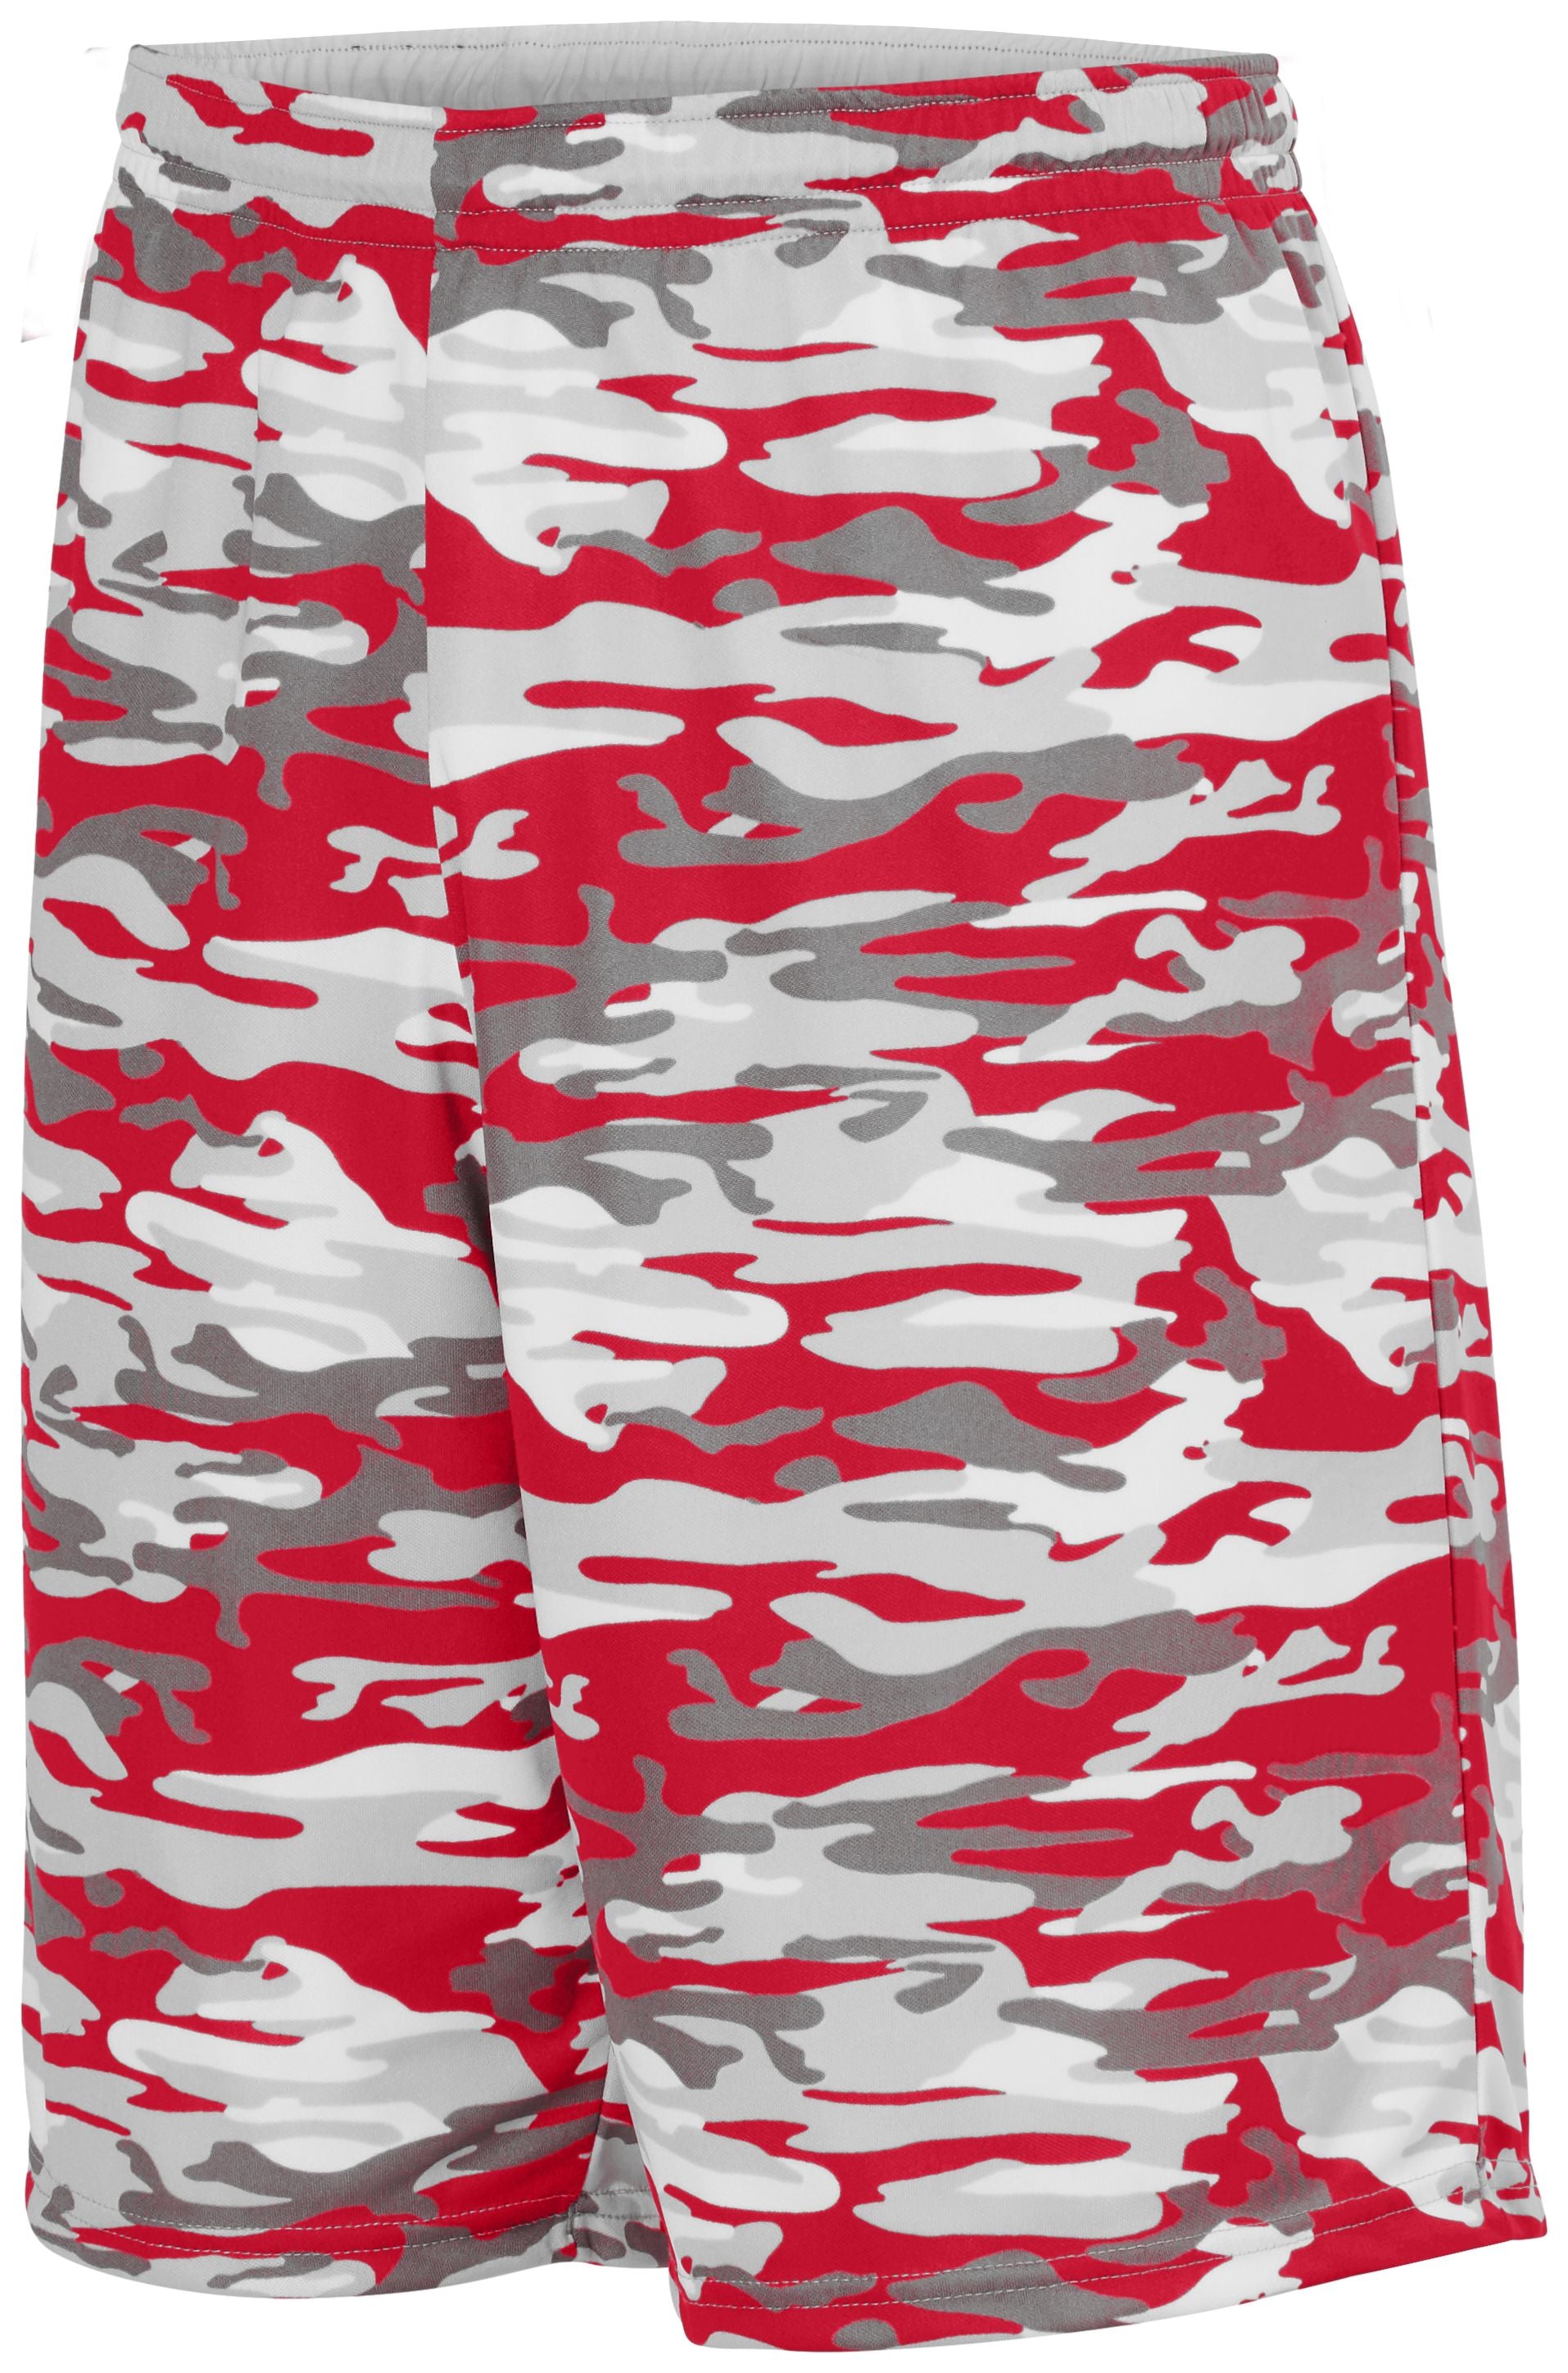 Augusta Sportswear Youth Reversible Wicking Shorts in Red Mod/White  -Part of the Youth, Youth-Shorts, Augusta-Products, Basketball, All-Sports, All-Sports-1 product lines at KanaleyCreations.com